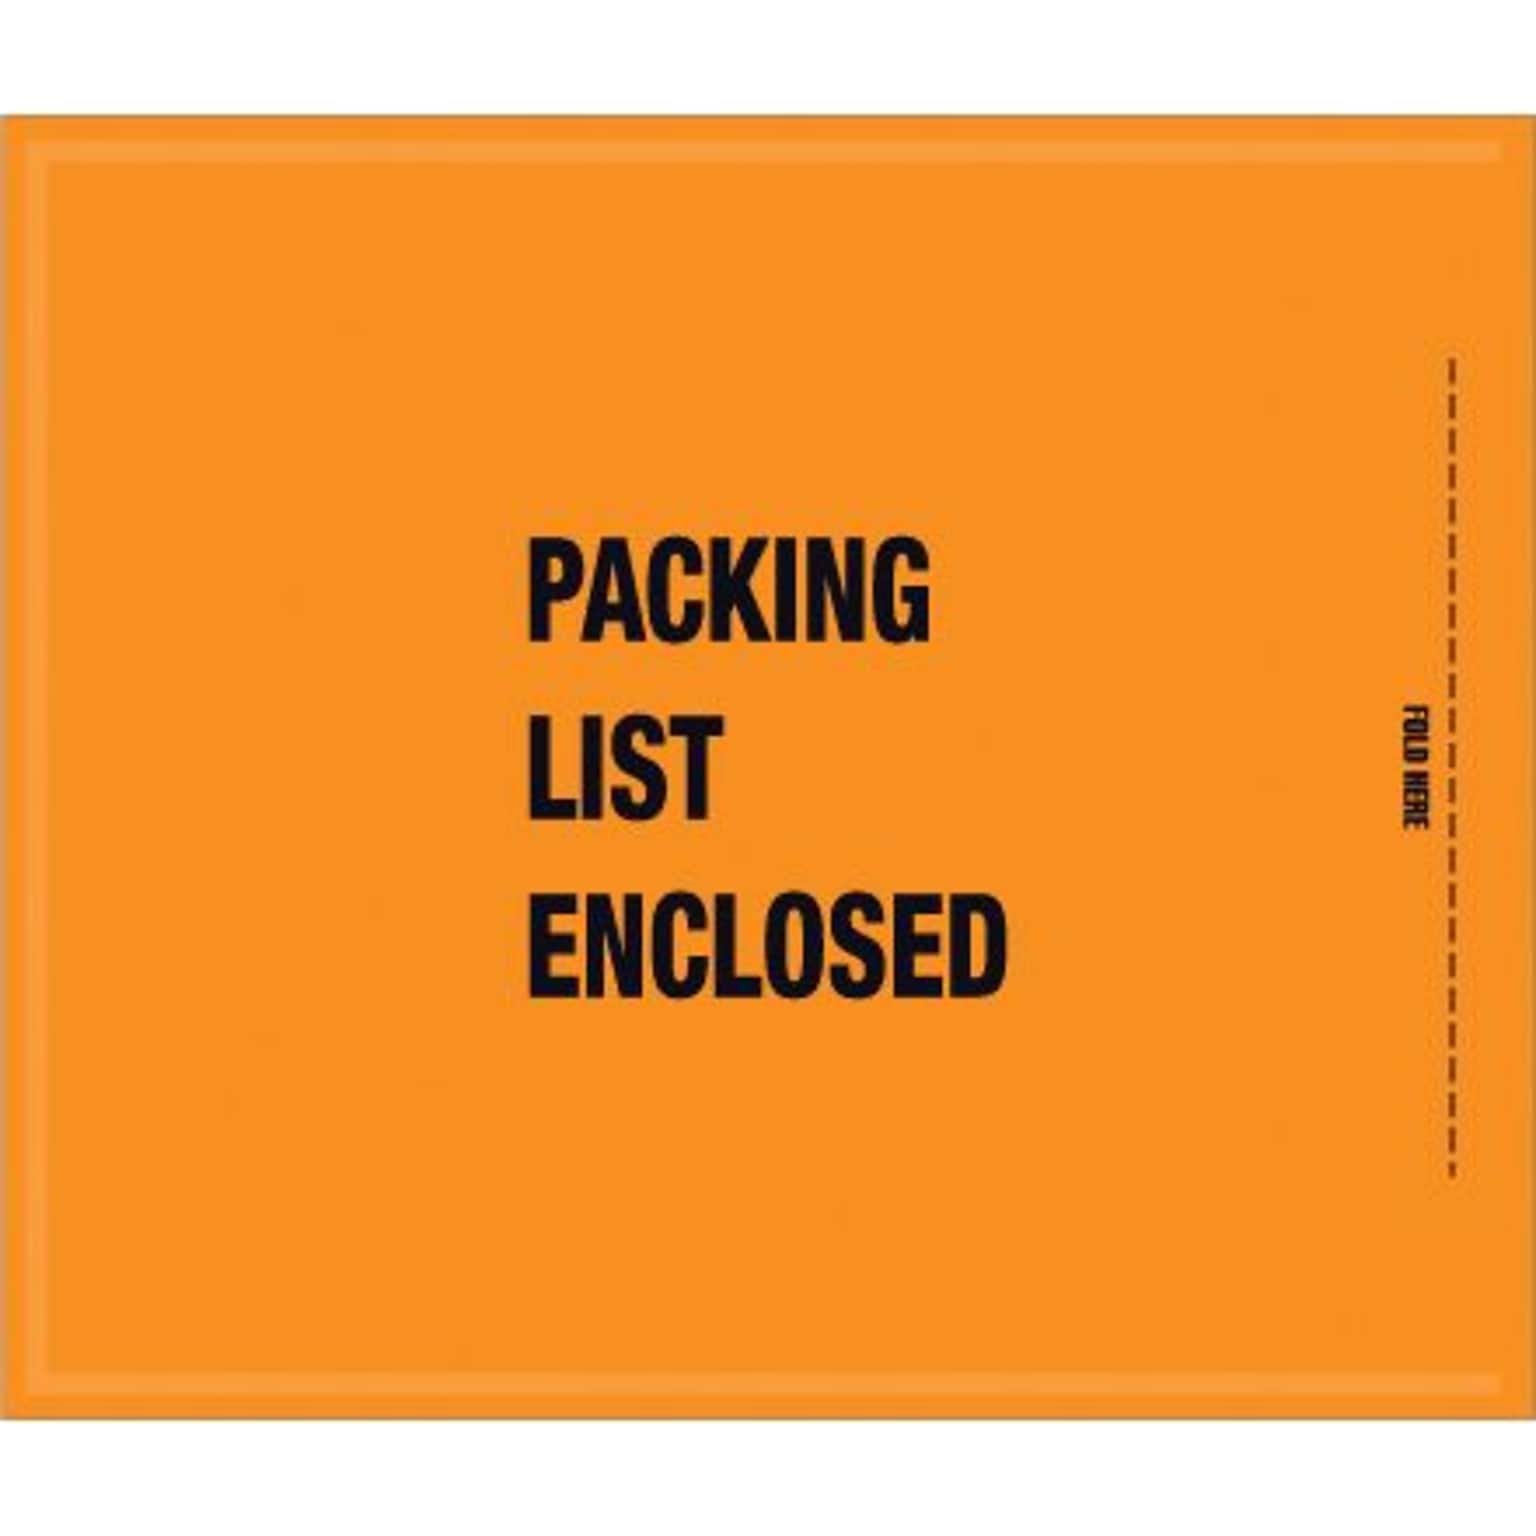 Quill Brand Packing List Envelope, 8 1/2 x 10 - Mil-Spec Orange Full Face Packing List Enclosed, 1000/Case